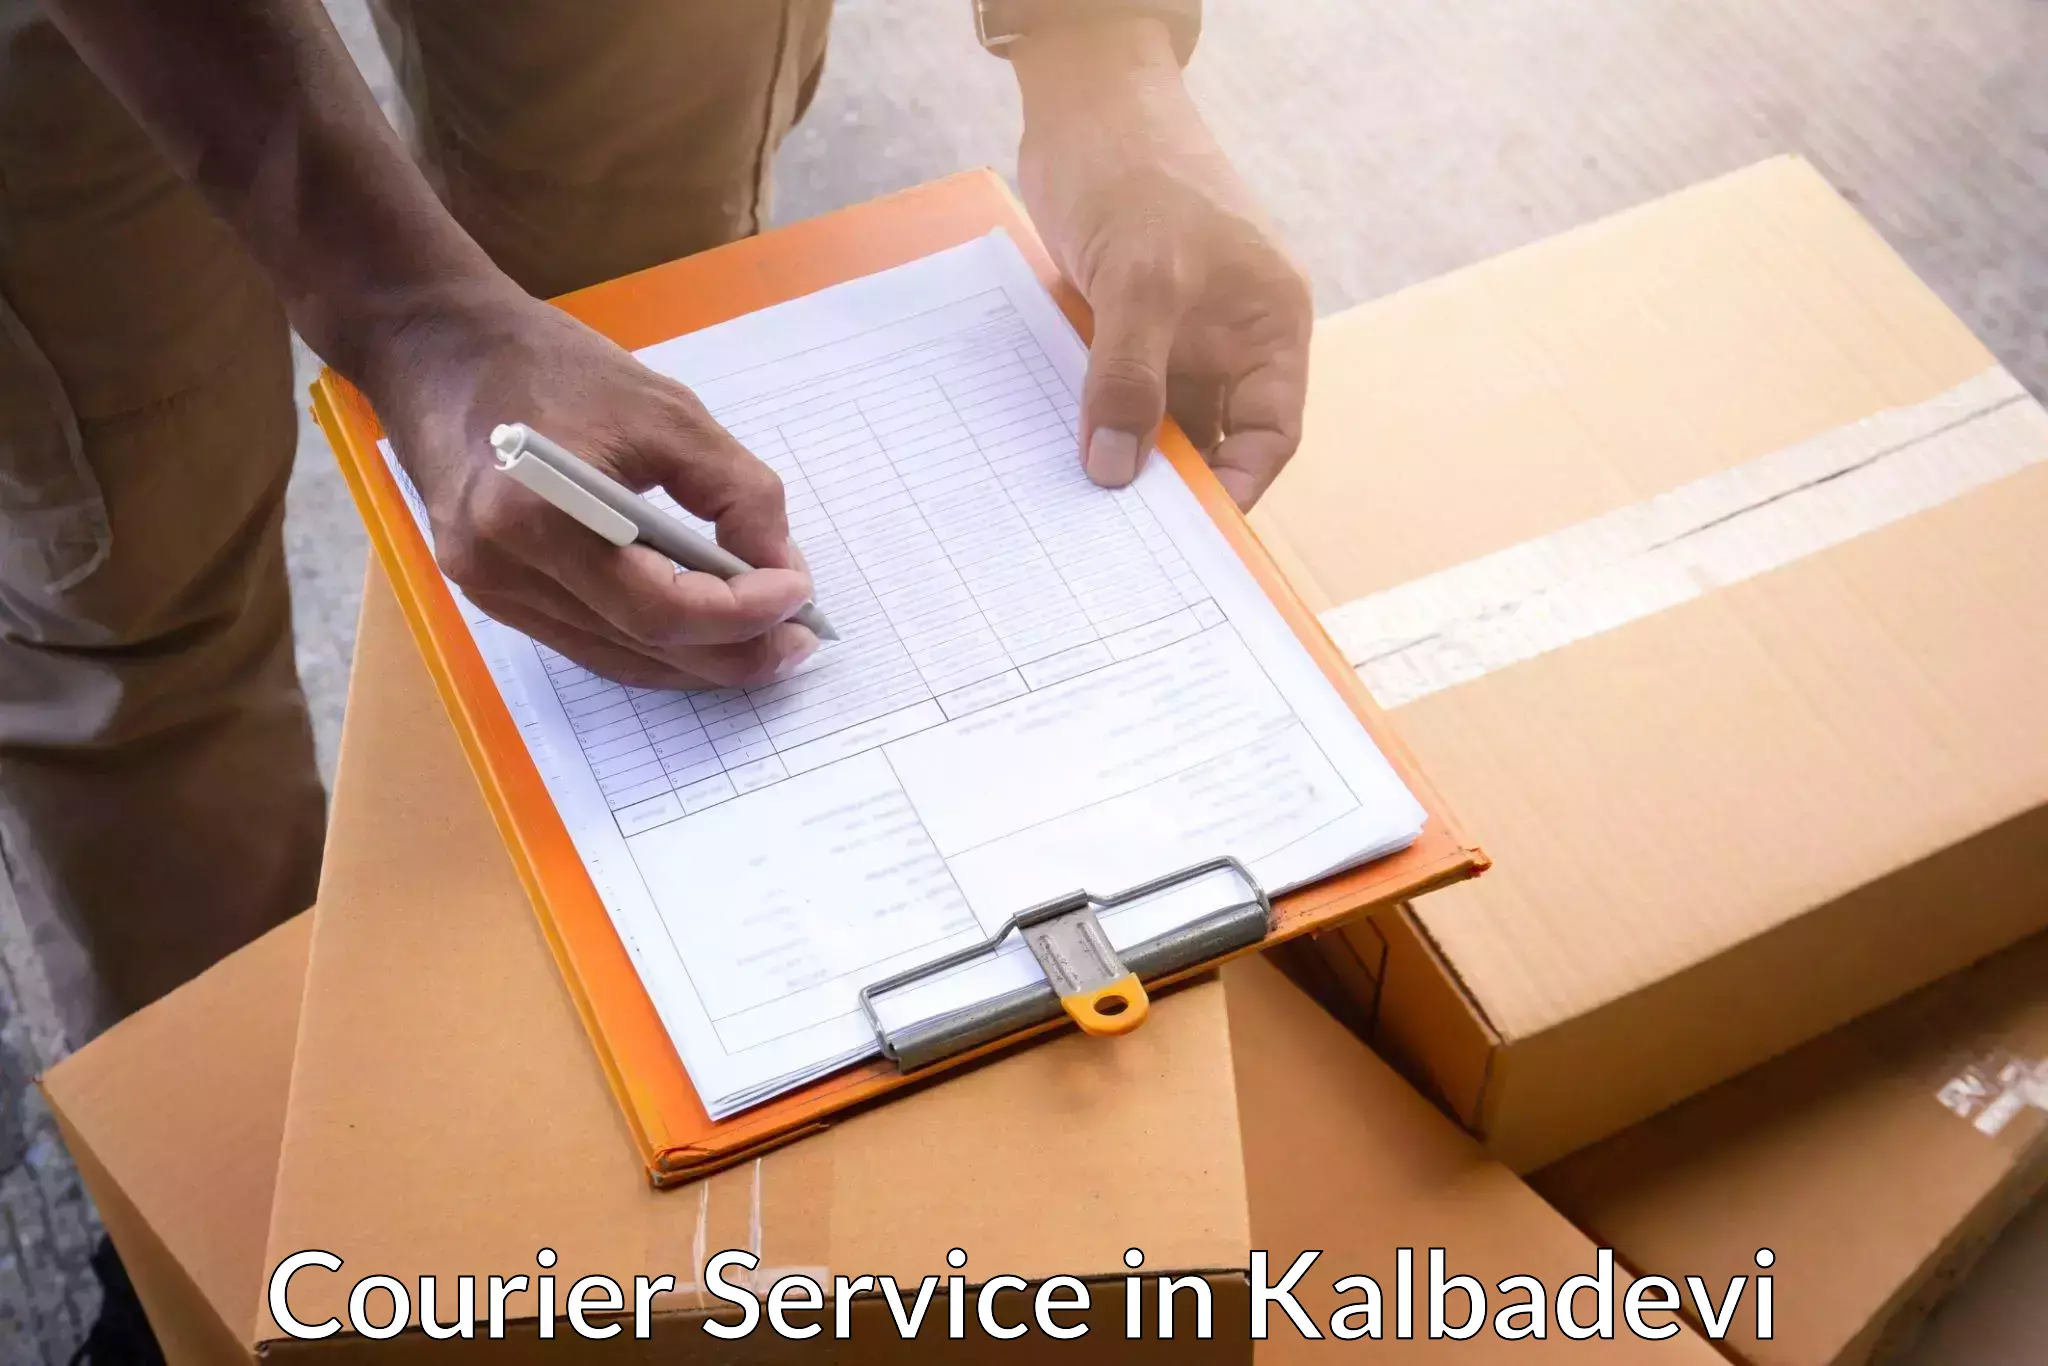 Round-the-clock parcel delivery in Kalbadevi